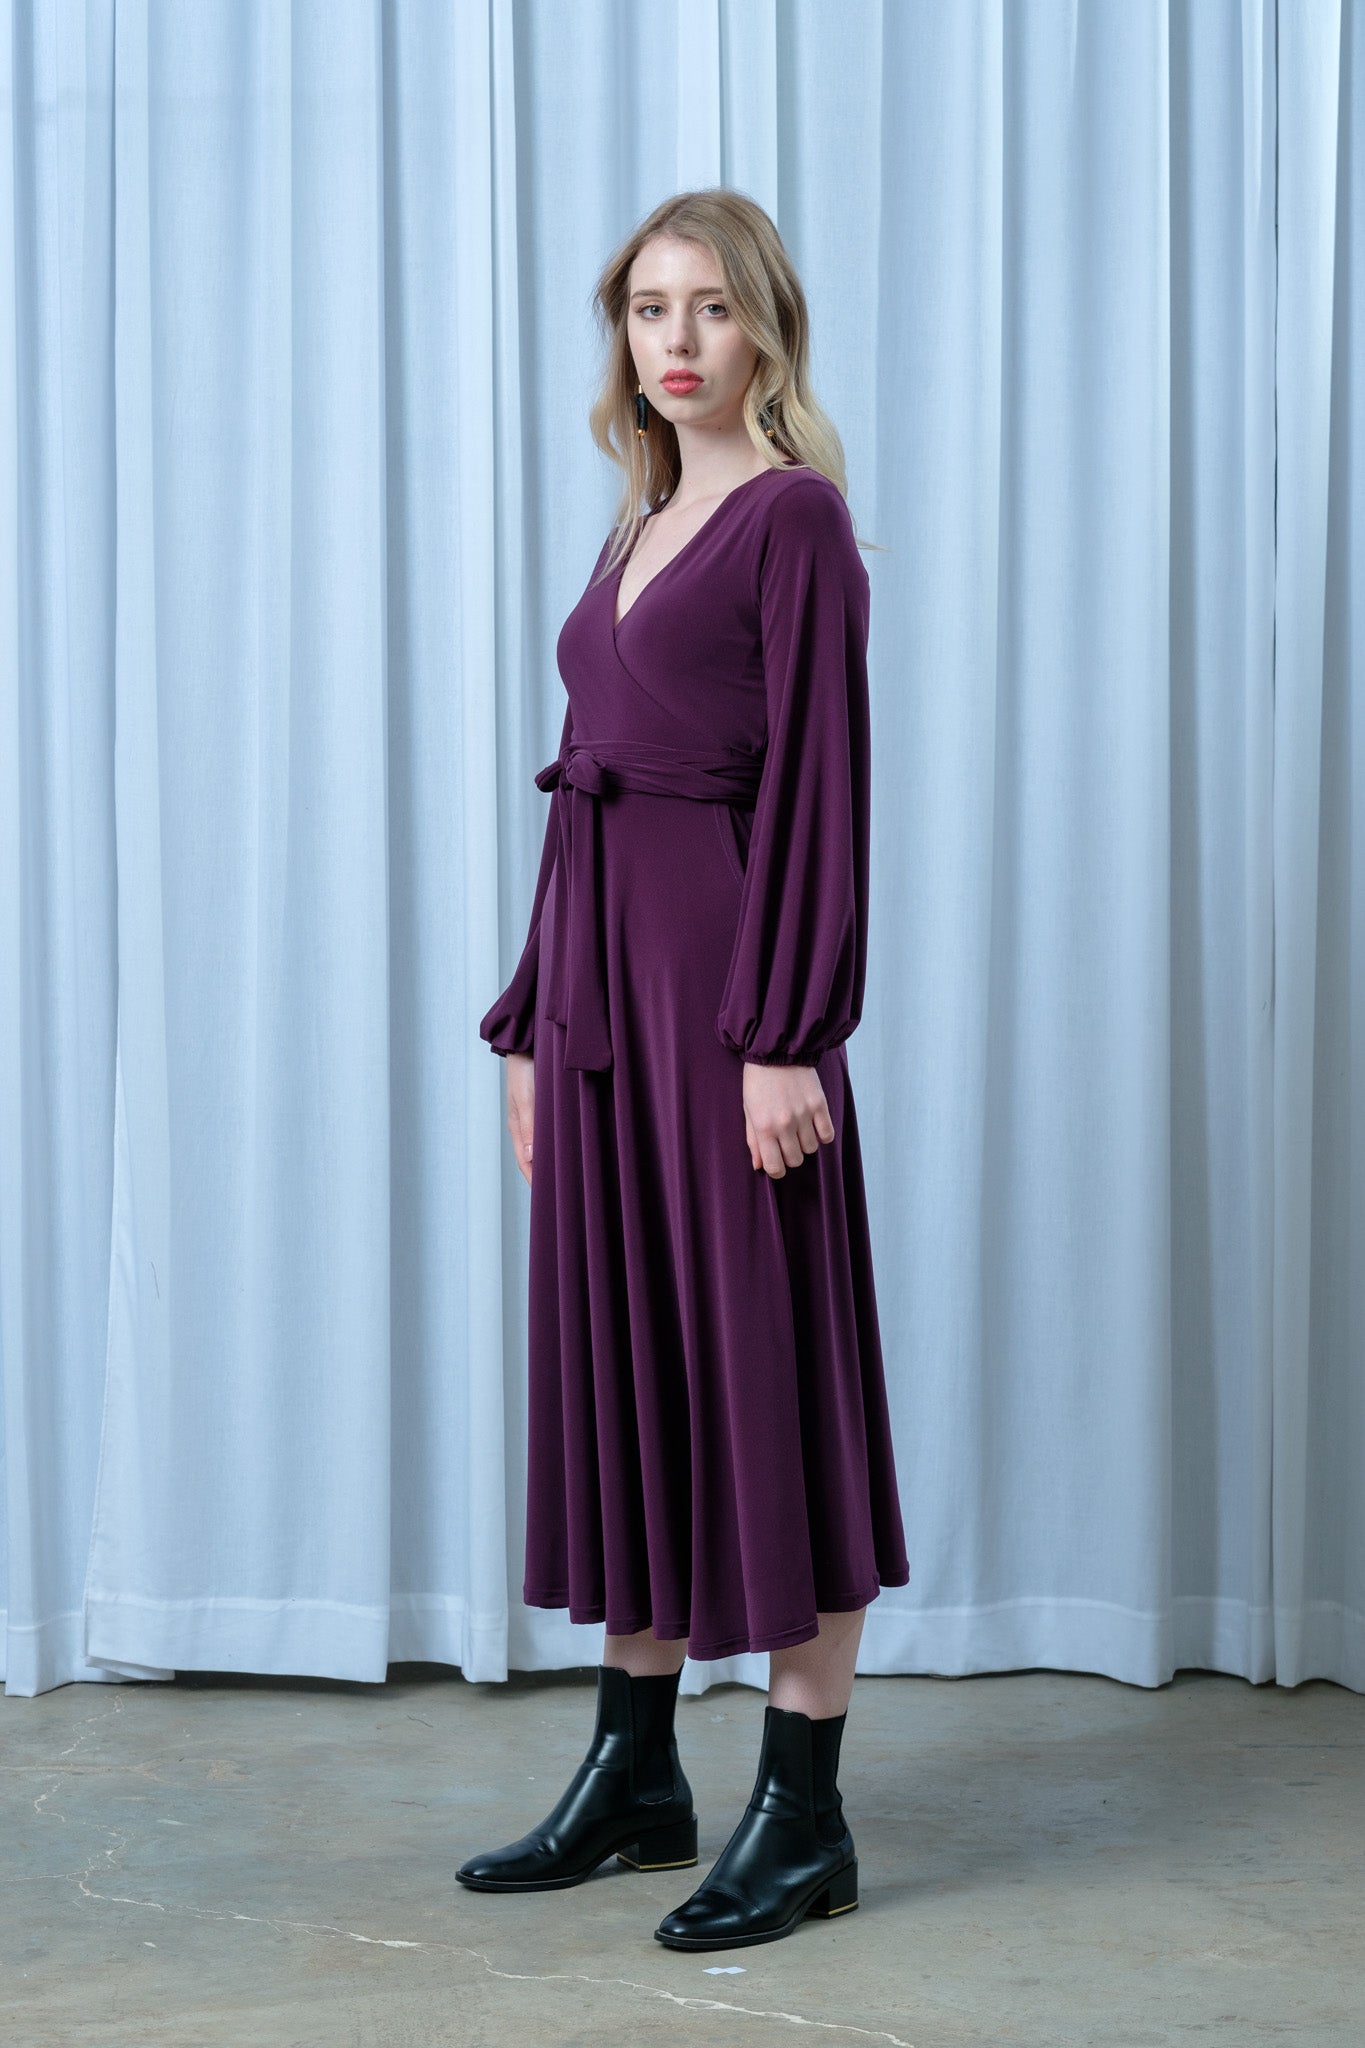 Winter Wear For Women: 10 Gorgeous Winter Dresses To Get Right Now